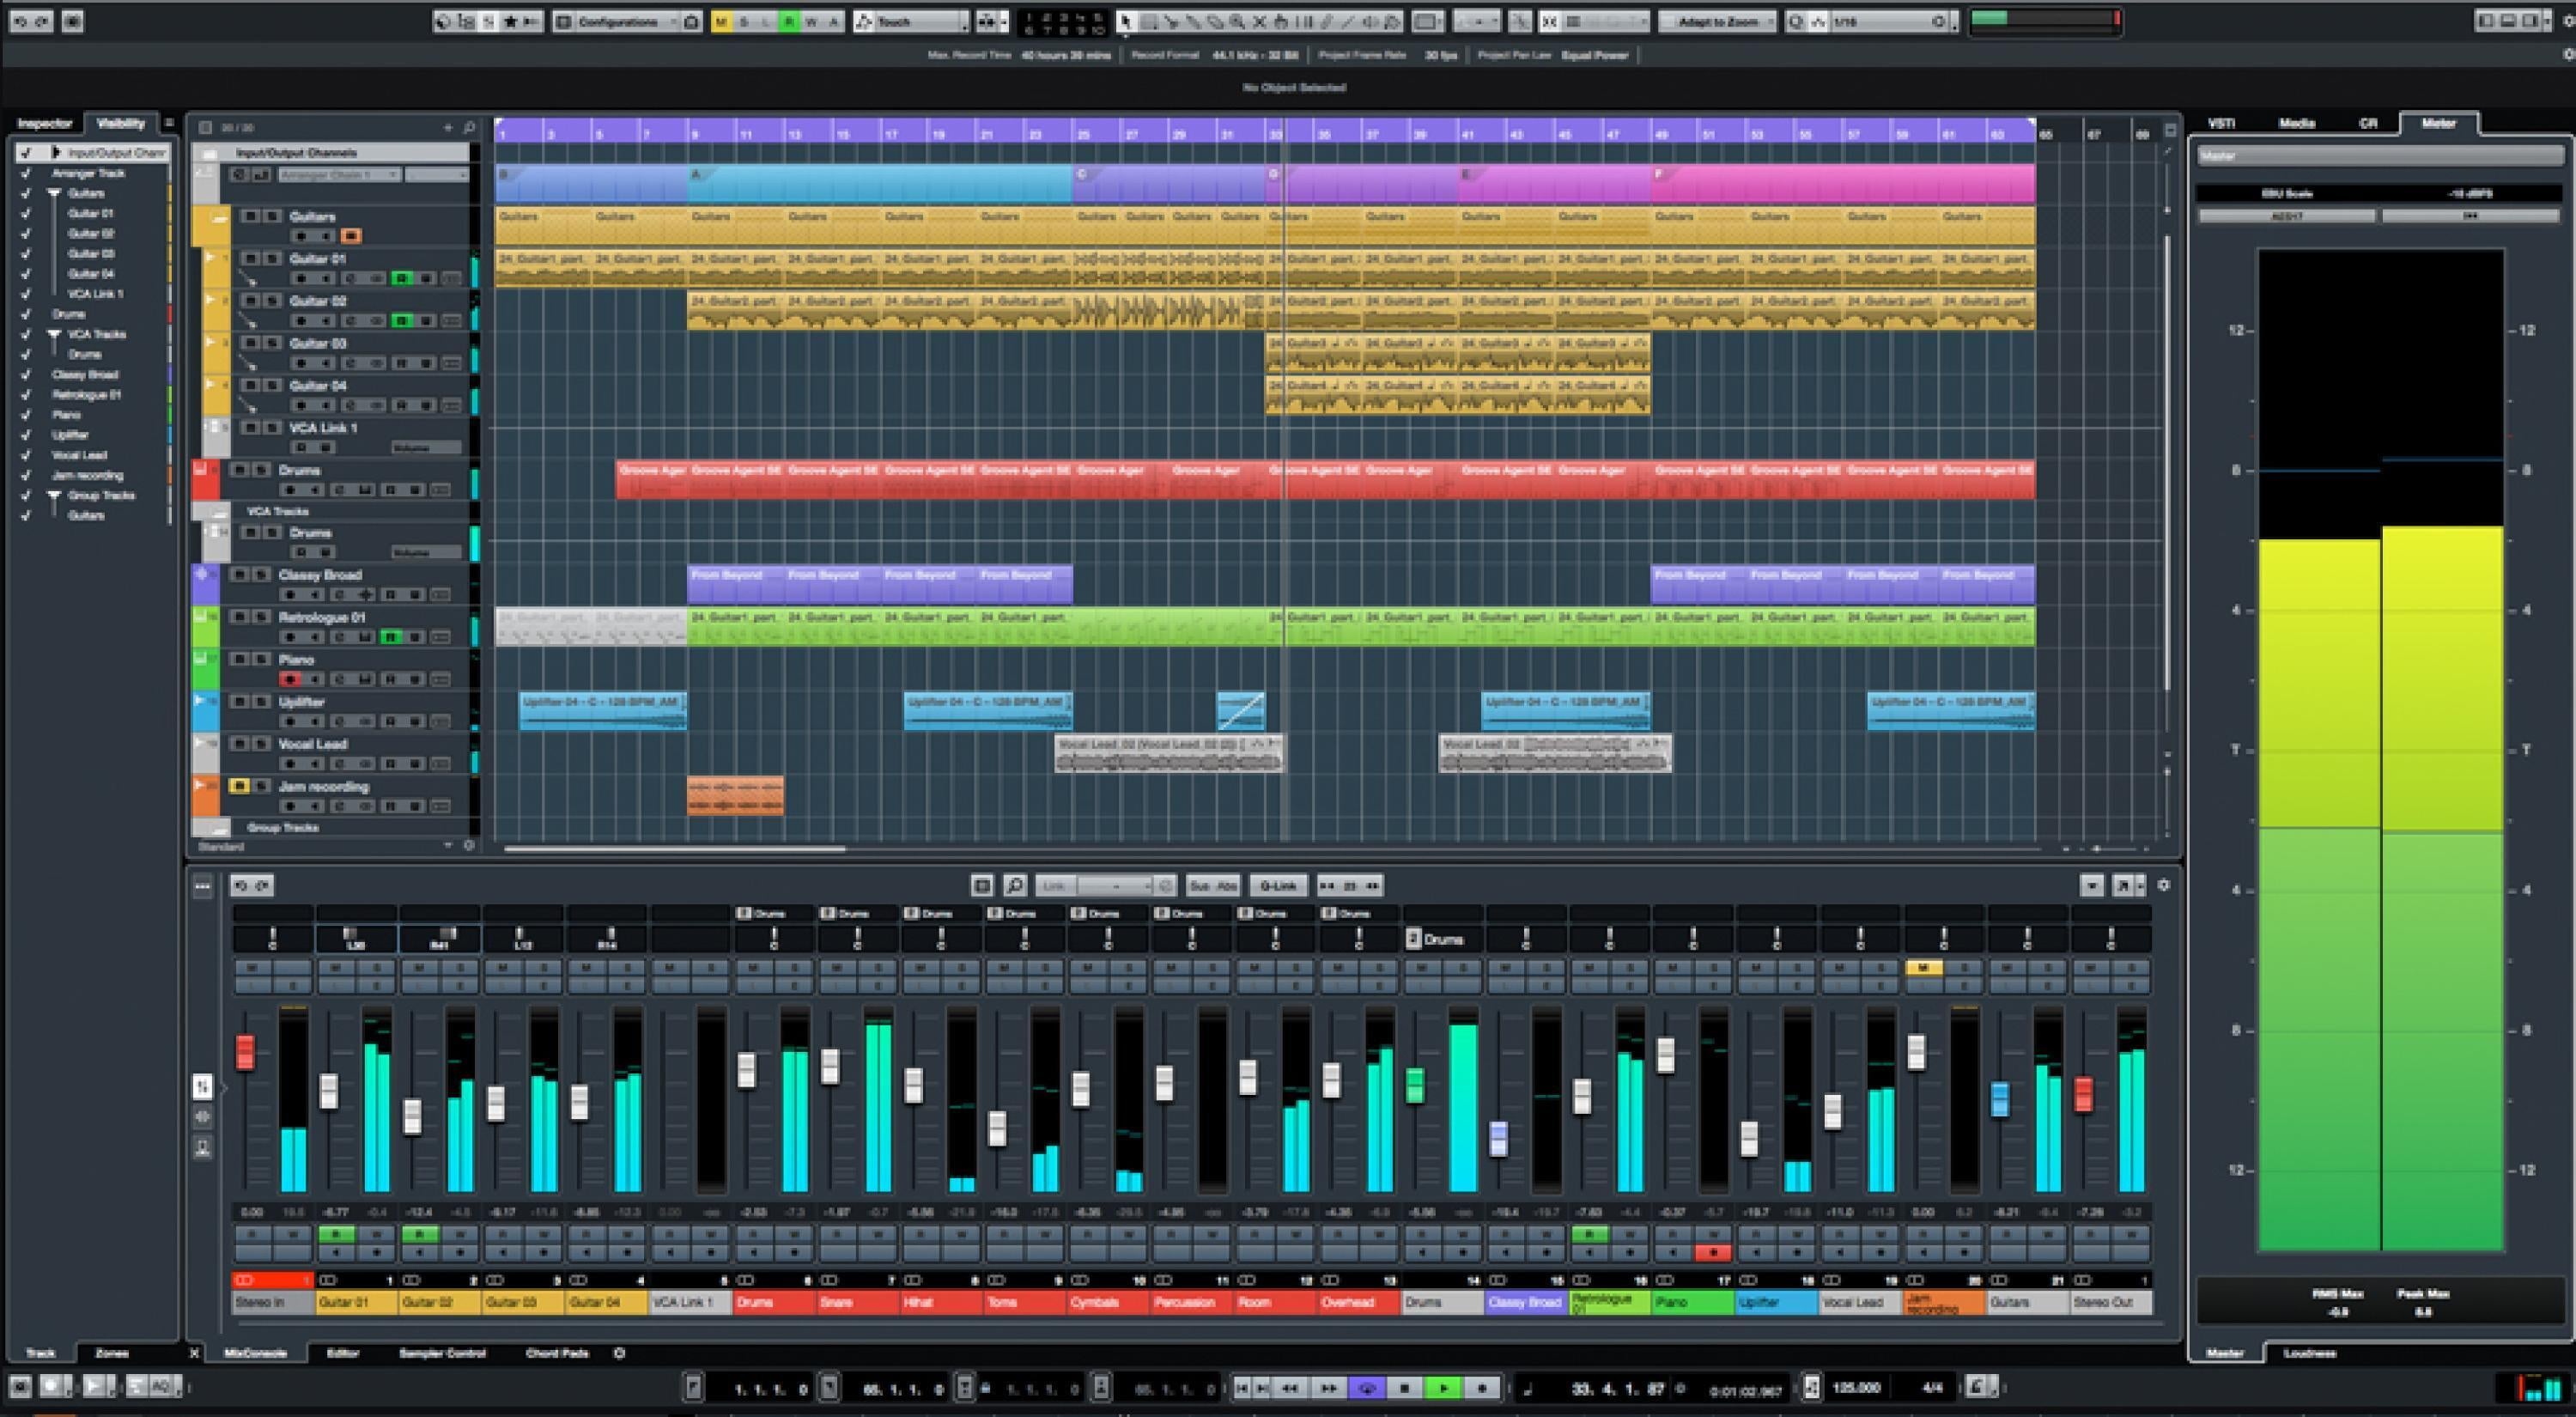 Steinberg Cubase Pro 9.5 - Update from Cubase Pro 8.5 (download)